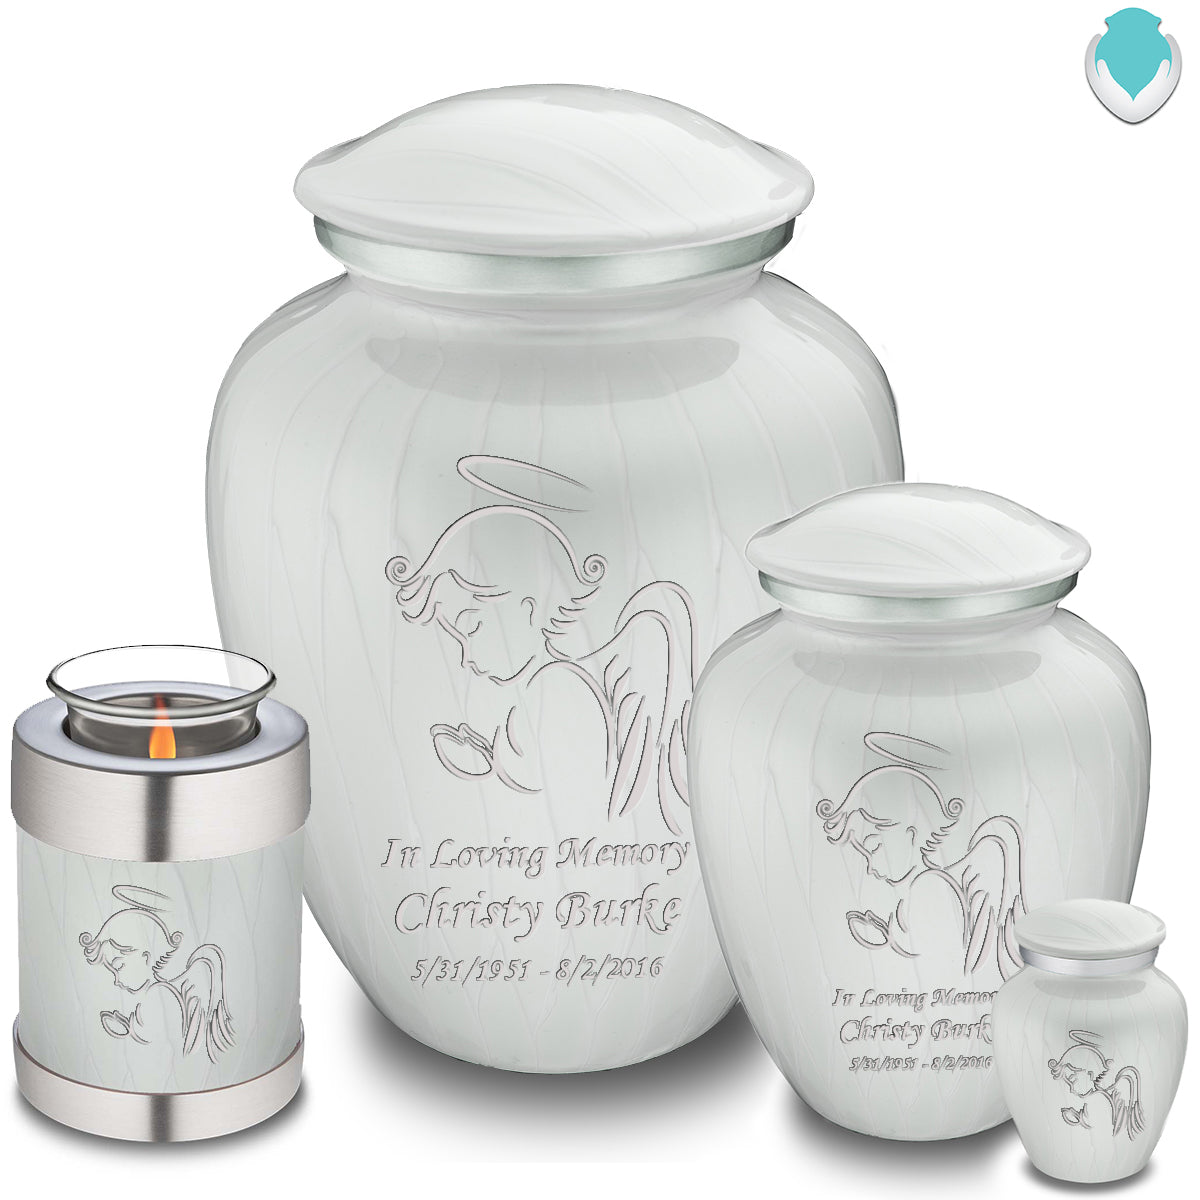 Adult Embrace Pearl White Angel Cremation Urn